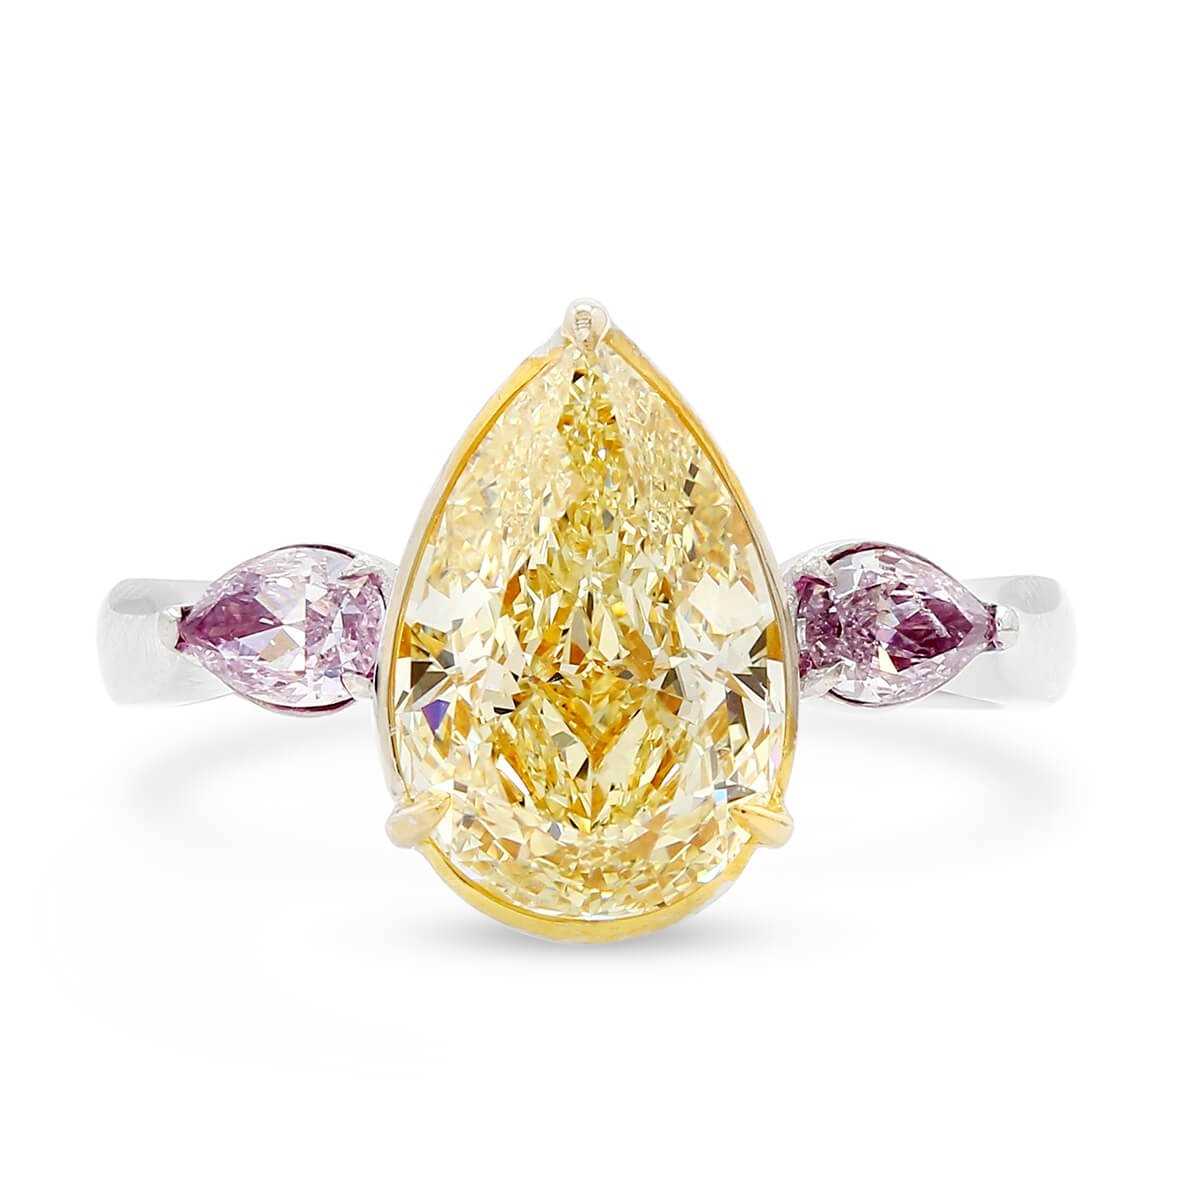 An impressive 18ct gold and fancy-yellow diamond ring, centred with a pear-cut fancy yellow